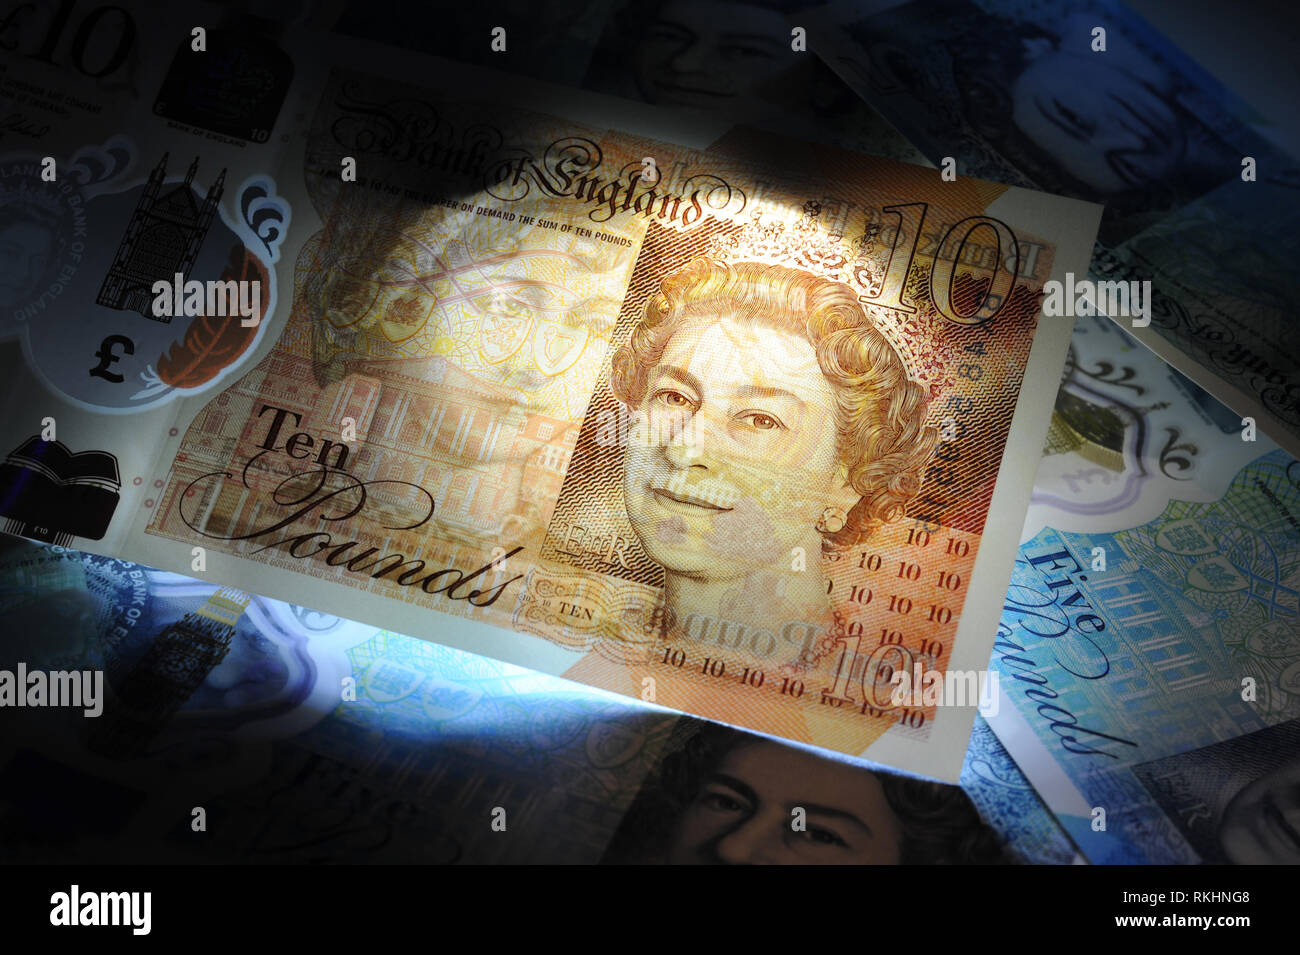 BRITISH TEN POUND NOTE WITH OTHER BANKNOTES RE MONEY THE ECONOMY THE QUEEN CHURCHILL CASH INCOMES WAGES LOANS ETC UK Stock Photo